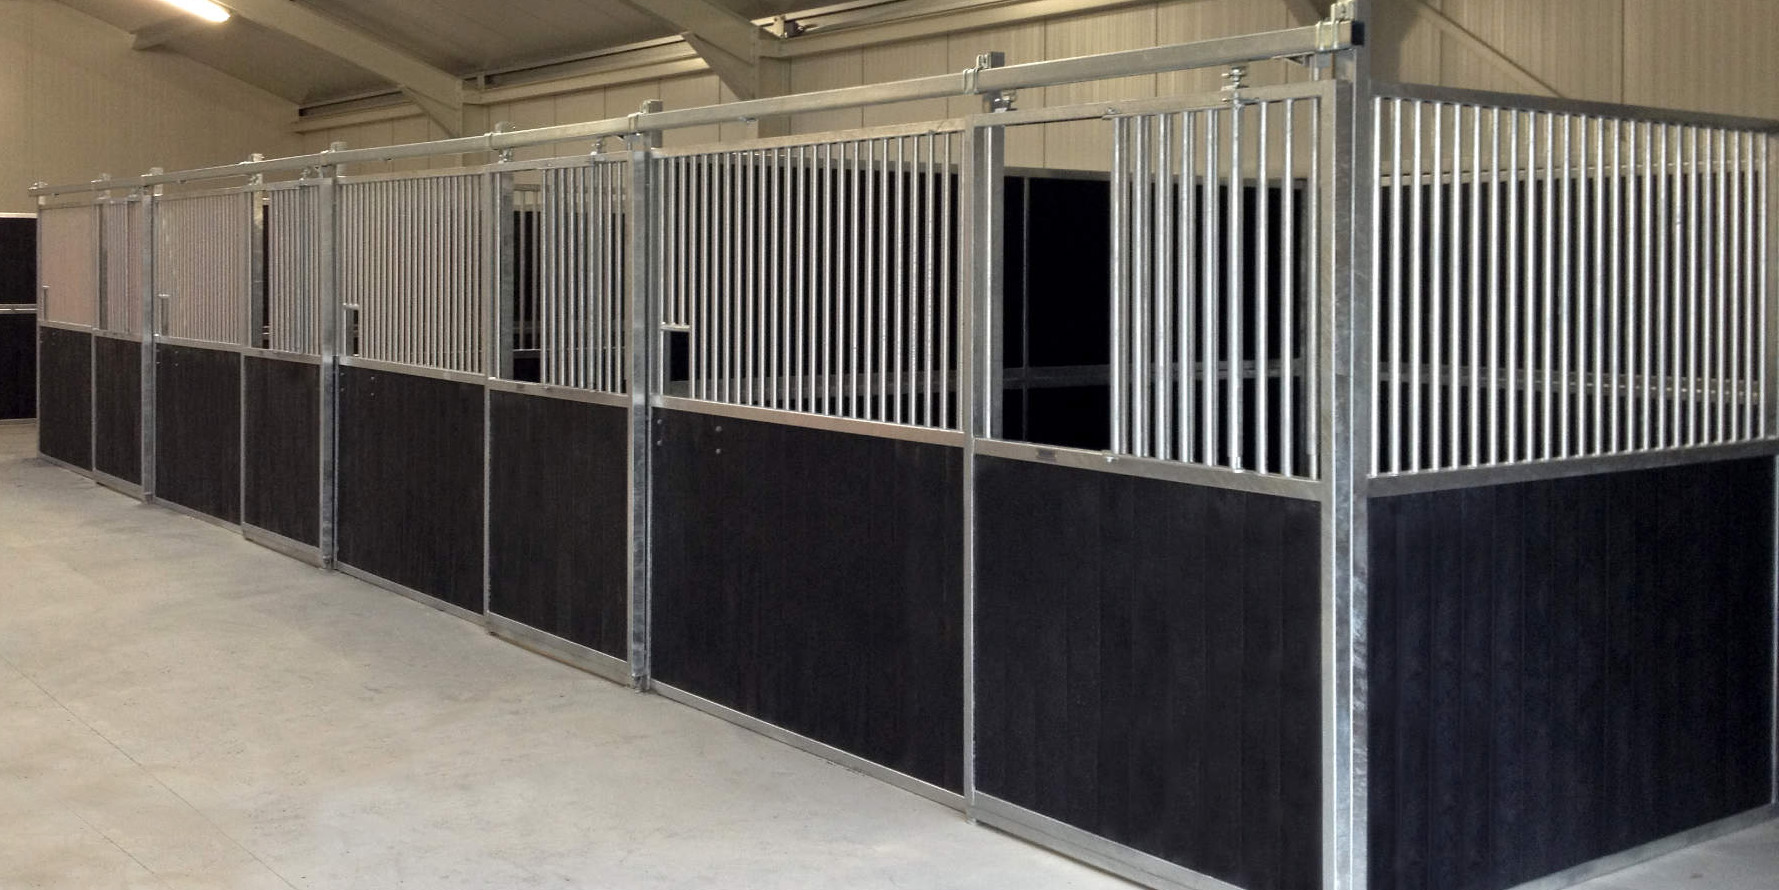 series of black plastic and steel stable panels on cement floor